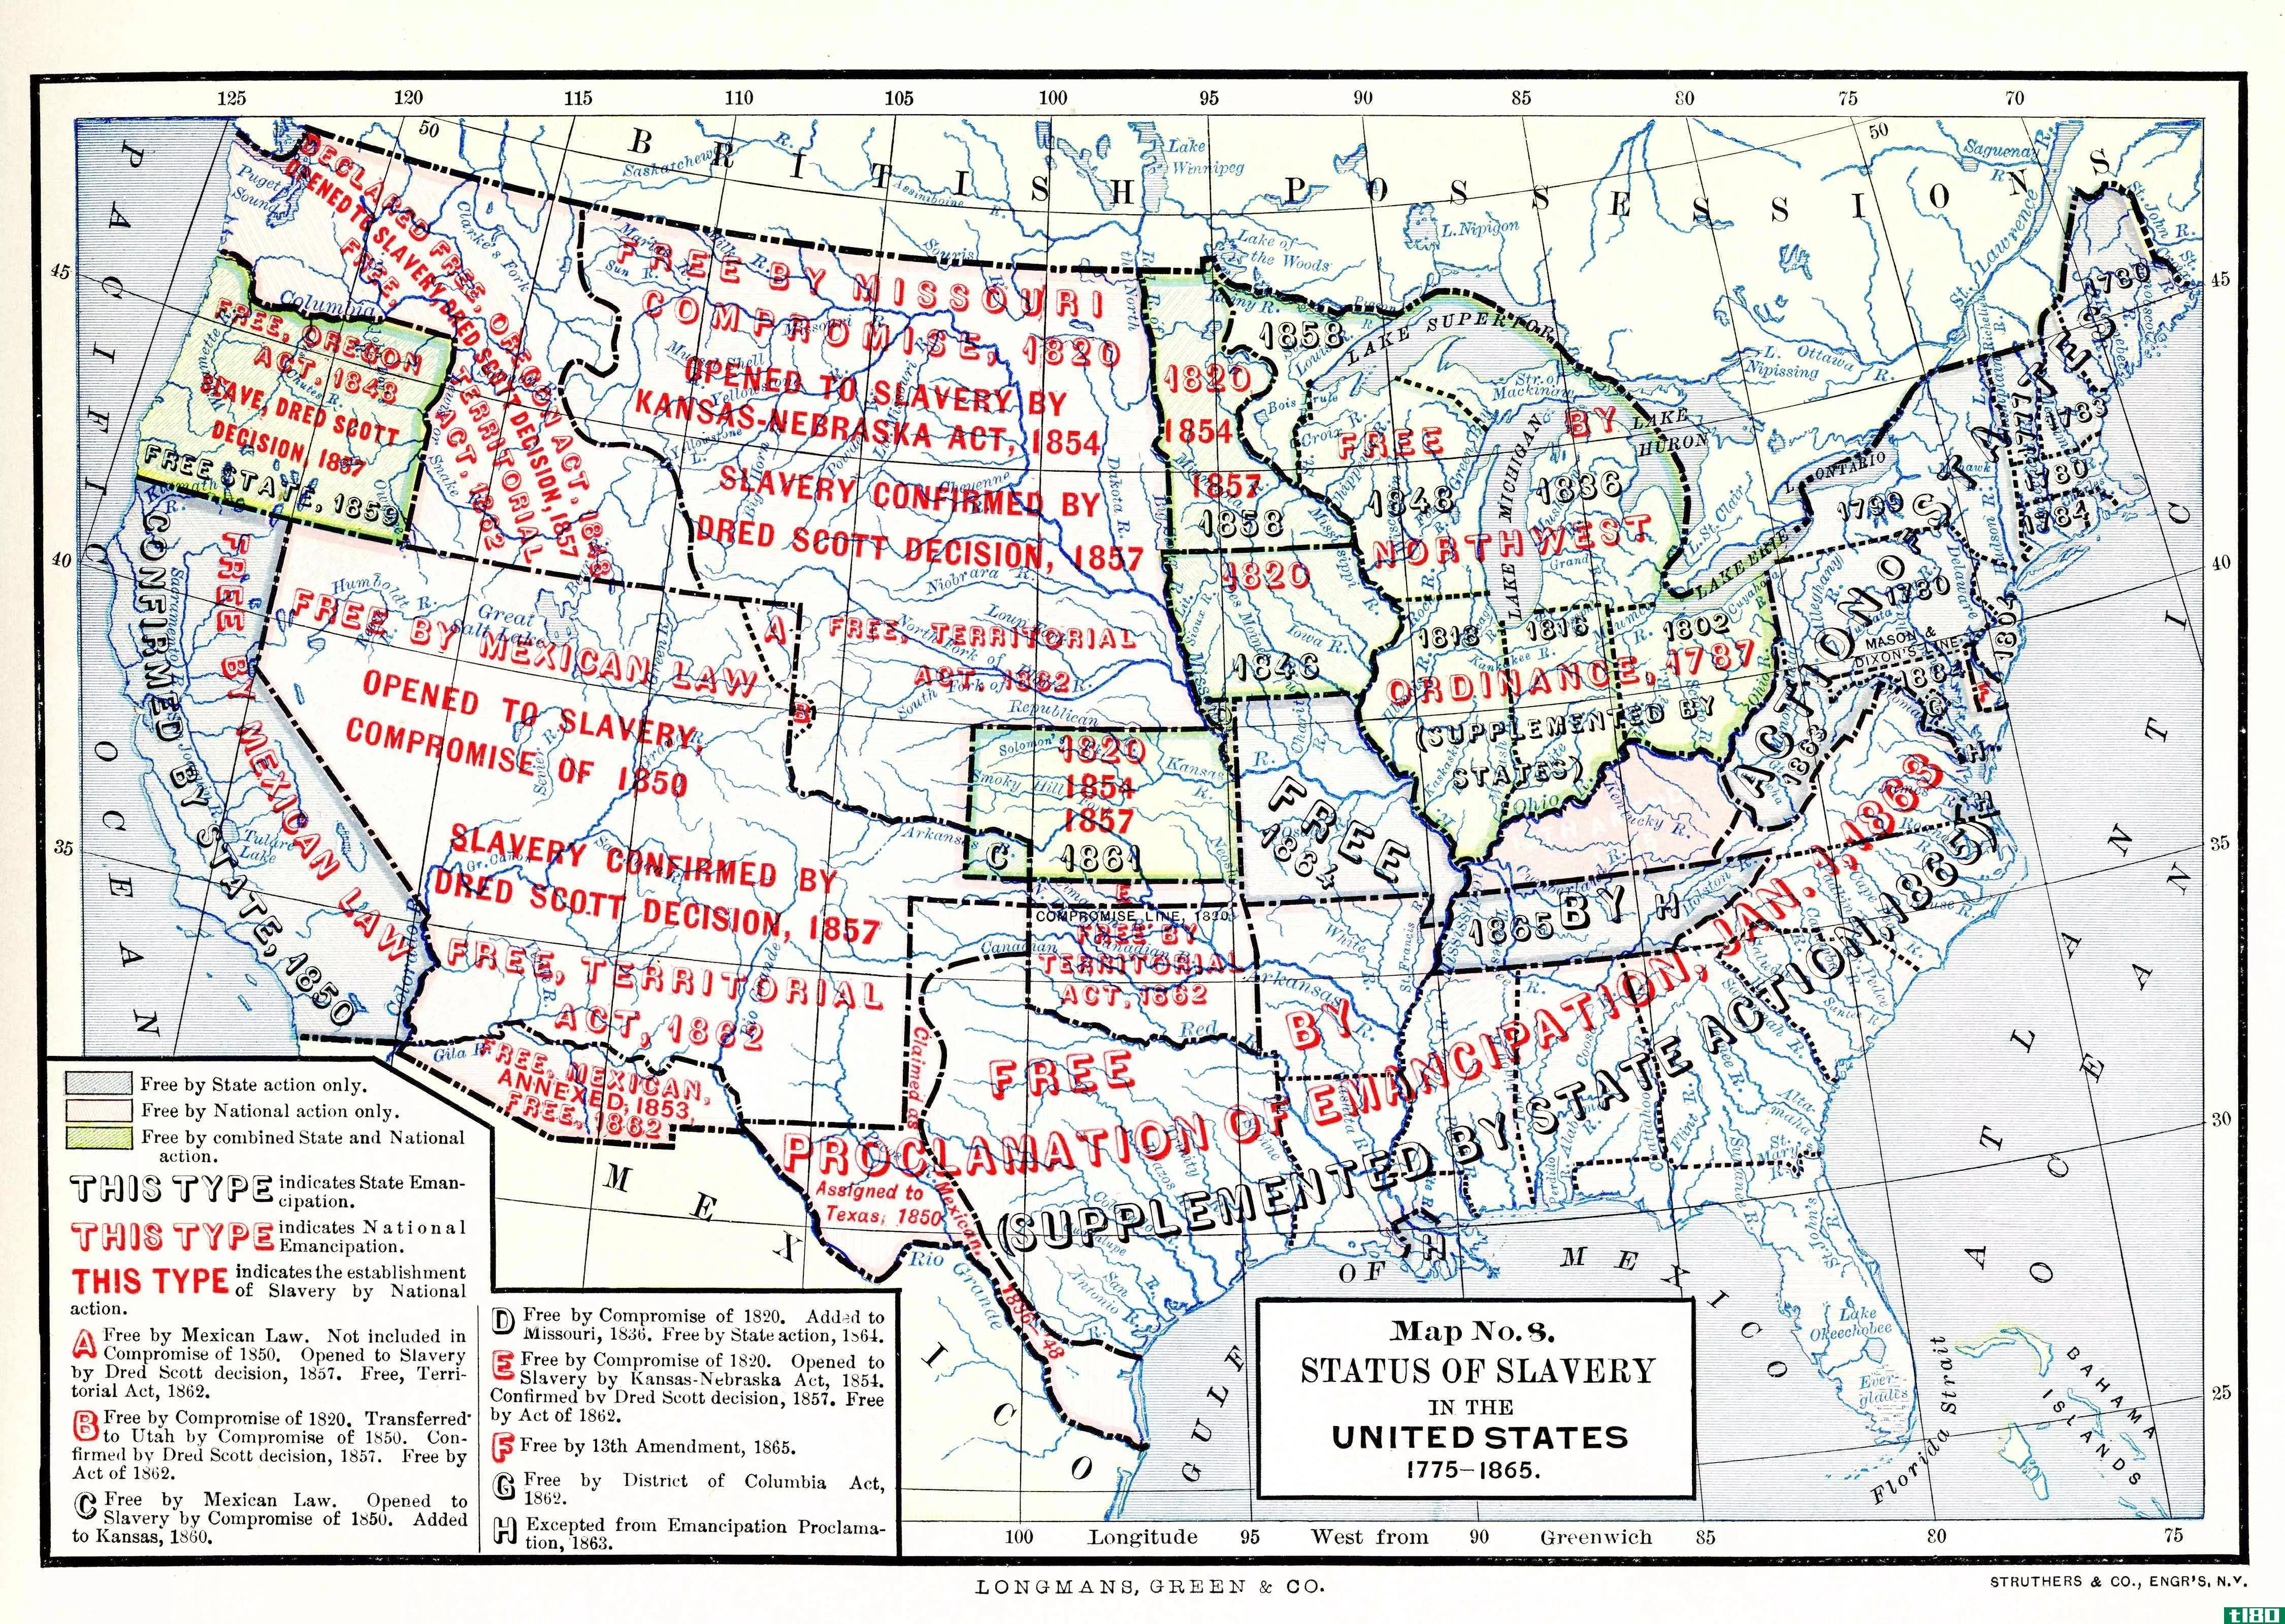 Color map, entitled 'Map No 8, Status of Slavery in the United States, 1775 - 1865,' illustrates the territorial application of various slavery related laws, published in 1898. Among the laws cited are the Missouri Compromise, the Dred Scott Decision, the Kansas Nebraska Act, and the Emancipation Proclamation.